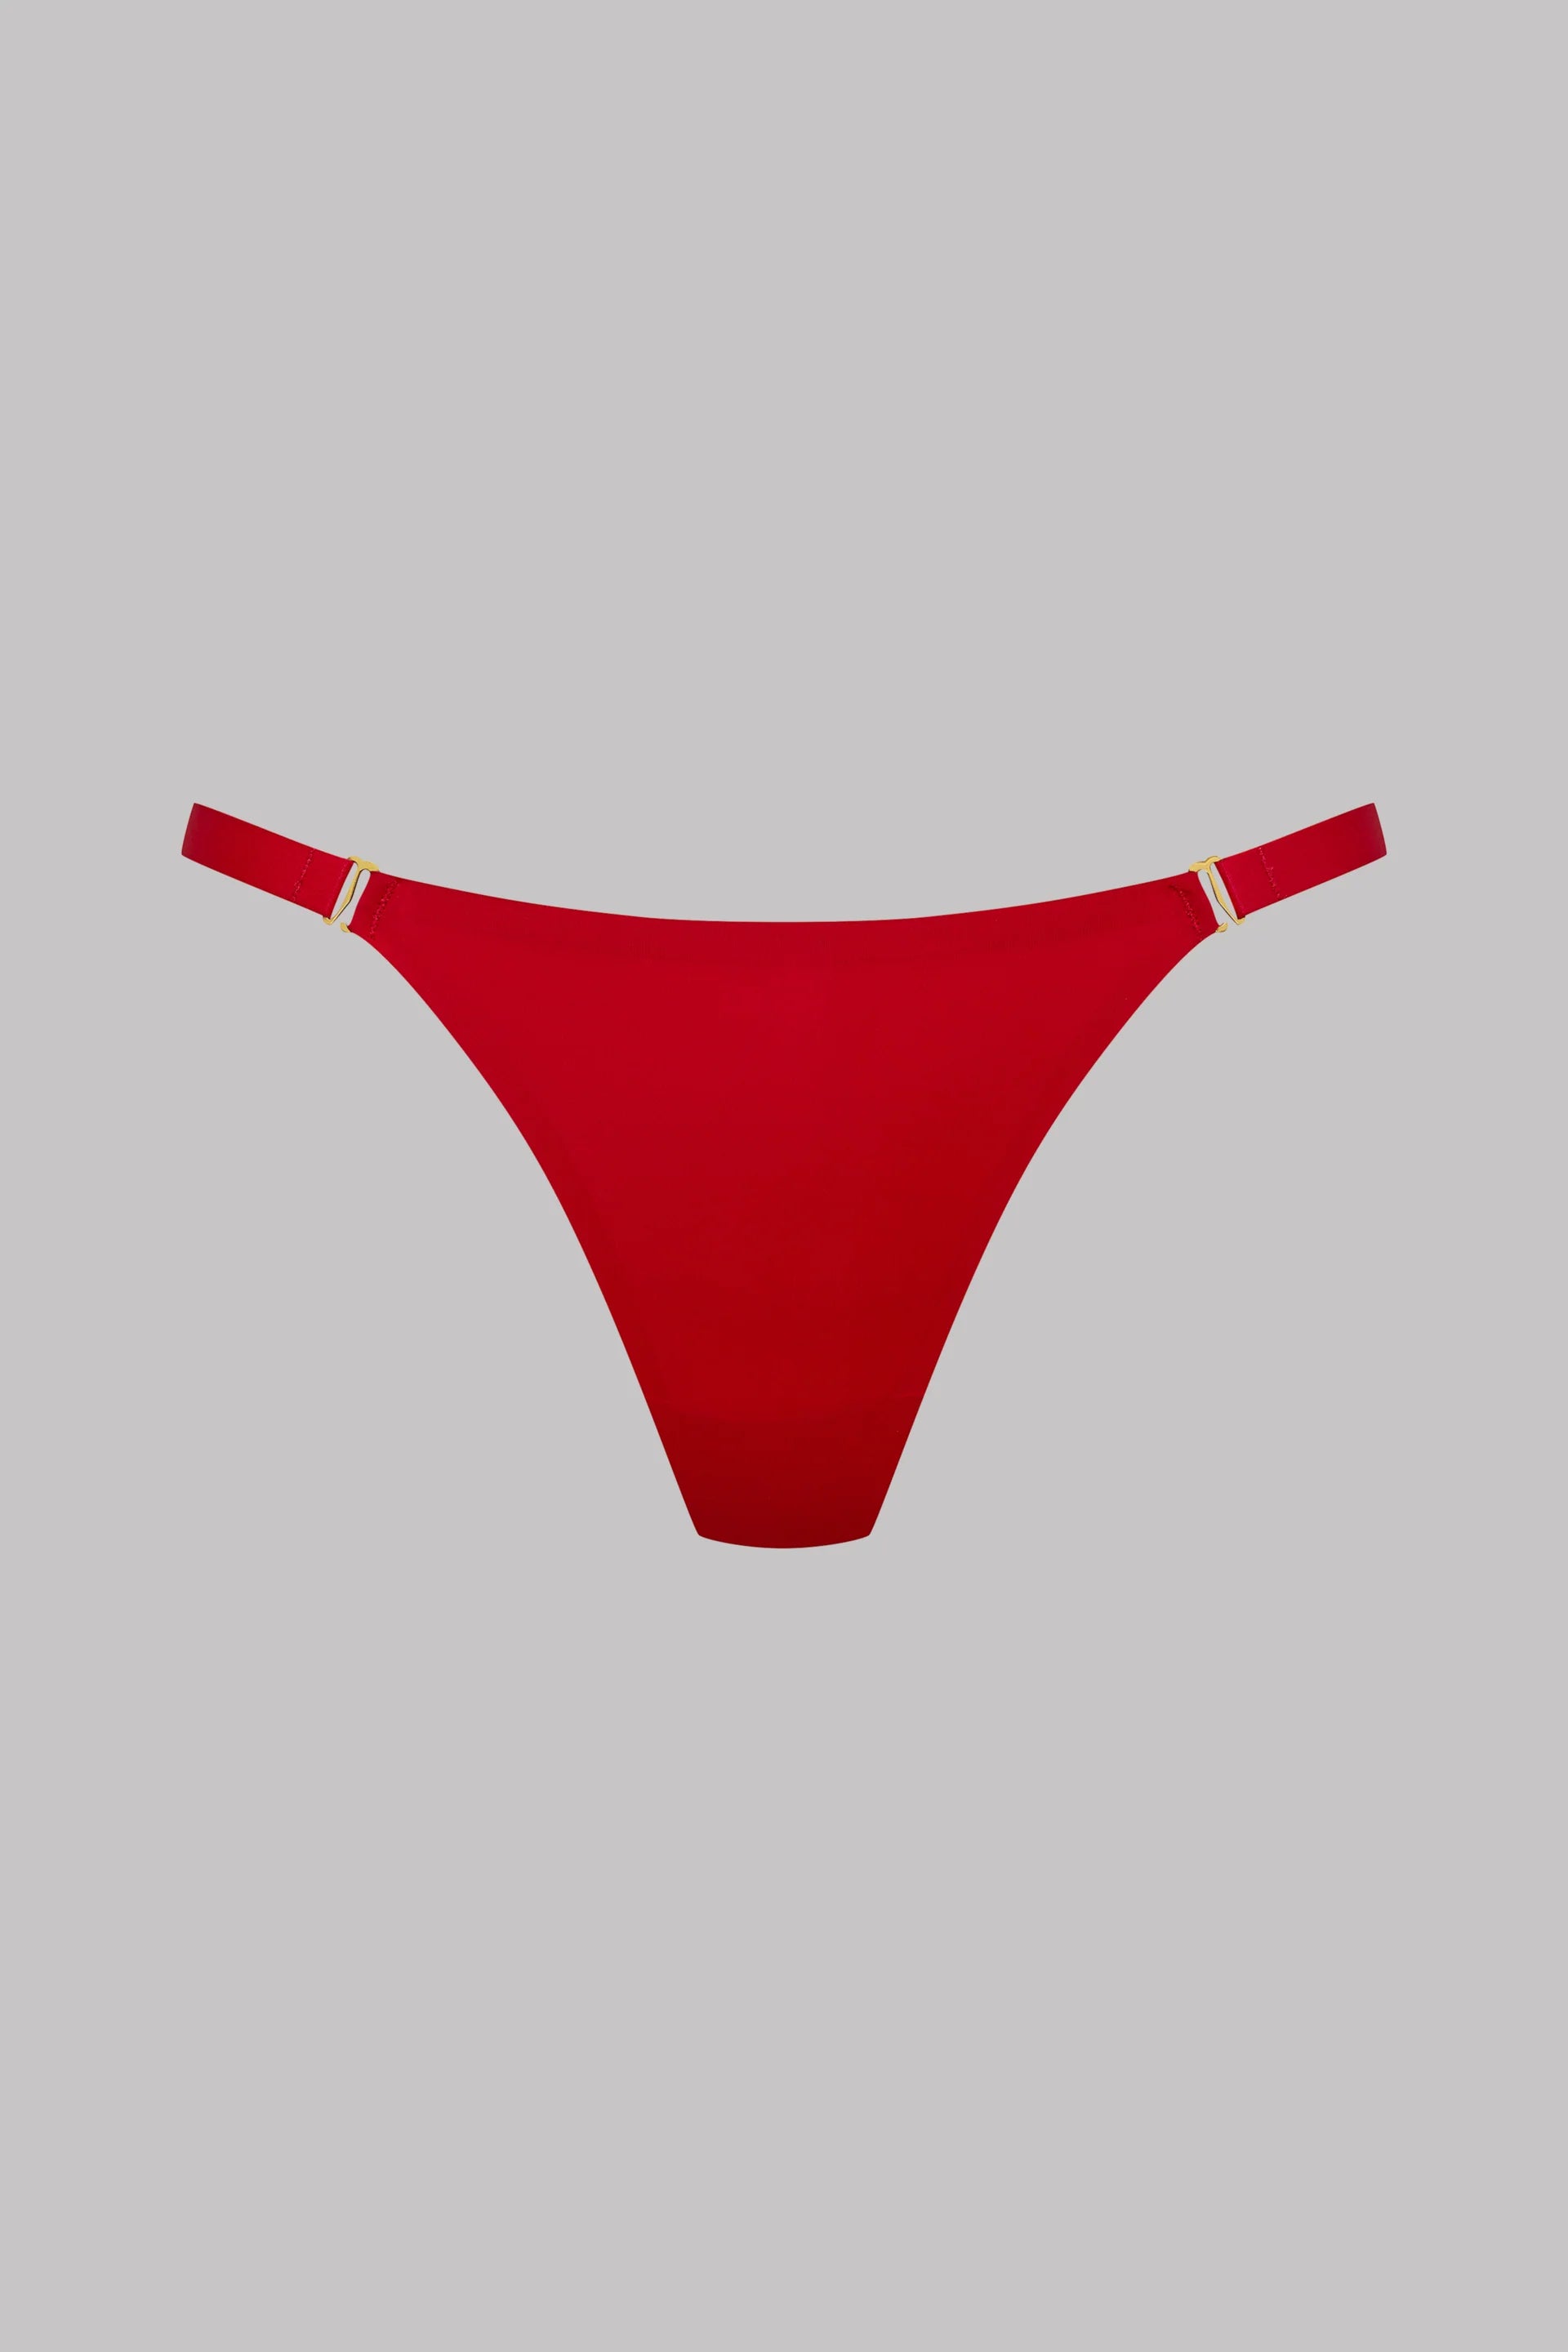 Tapage Nocturne Mini Thong – Workingirls Lingerie